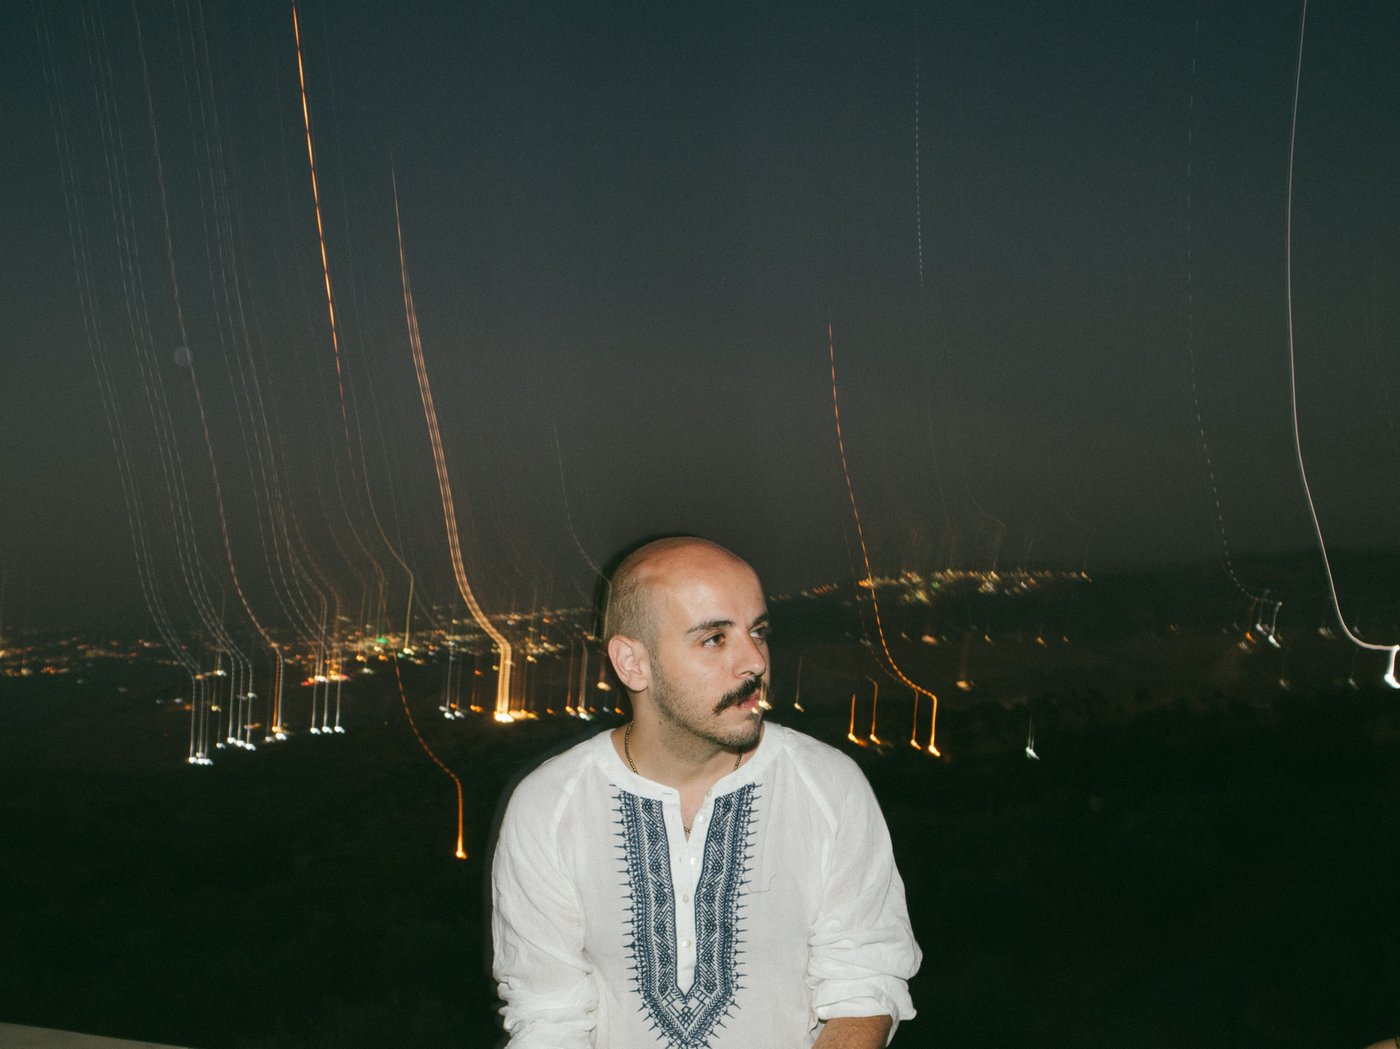 Half portrait of the artist, person with shaved hair, black moustache and three days beard on cheeks and chin in white, collarless shirt; in the background blurred lights of a city view at night;